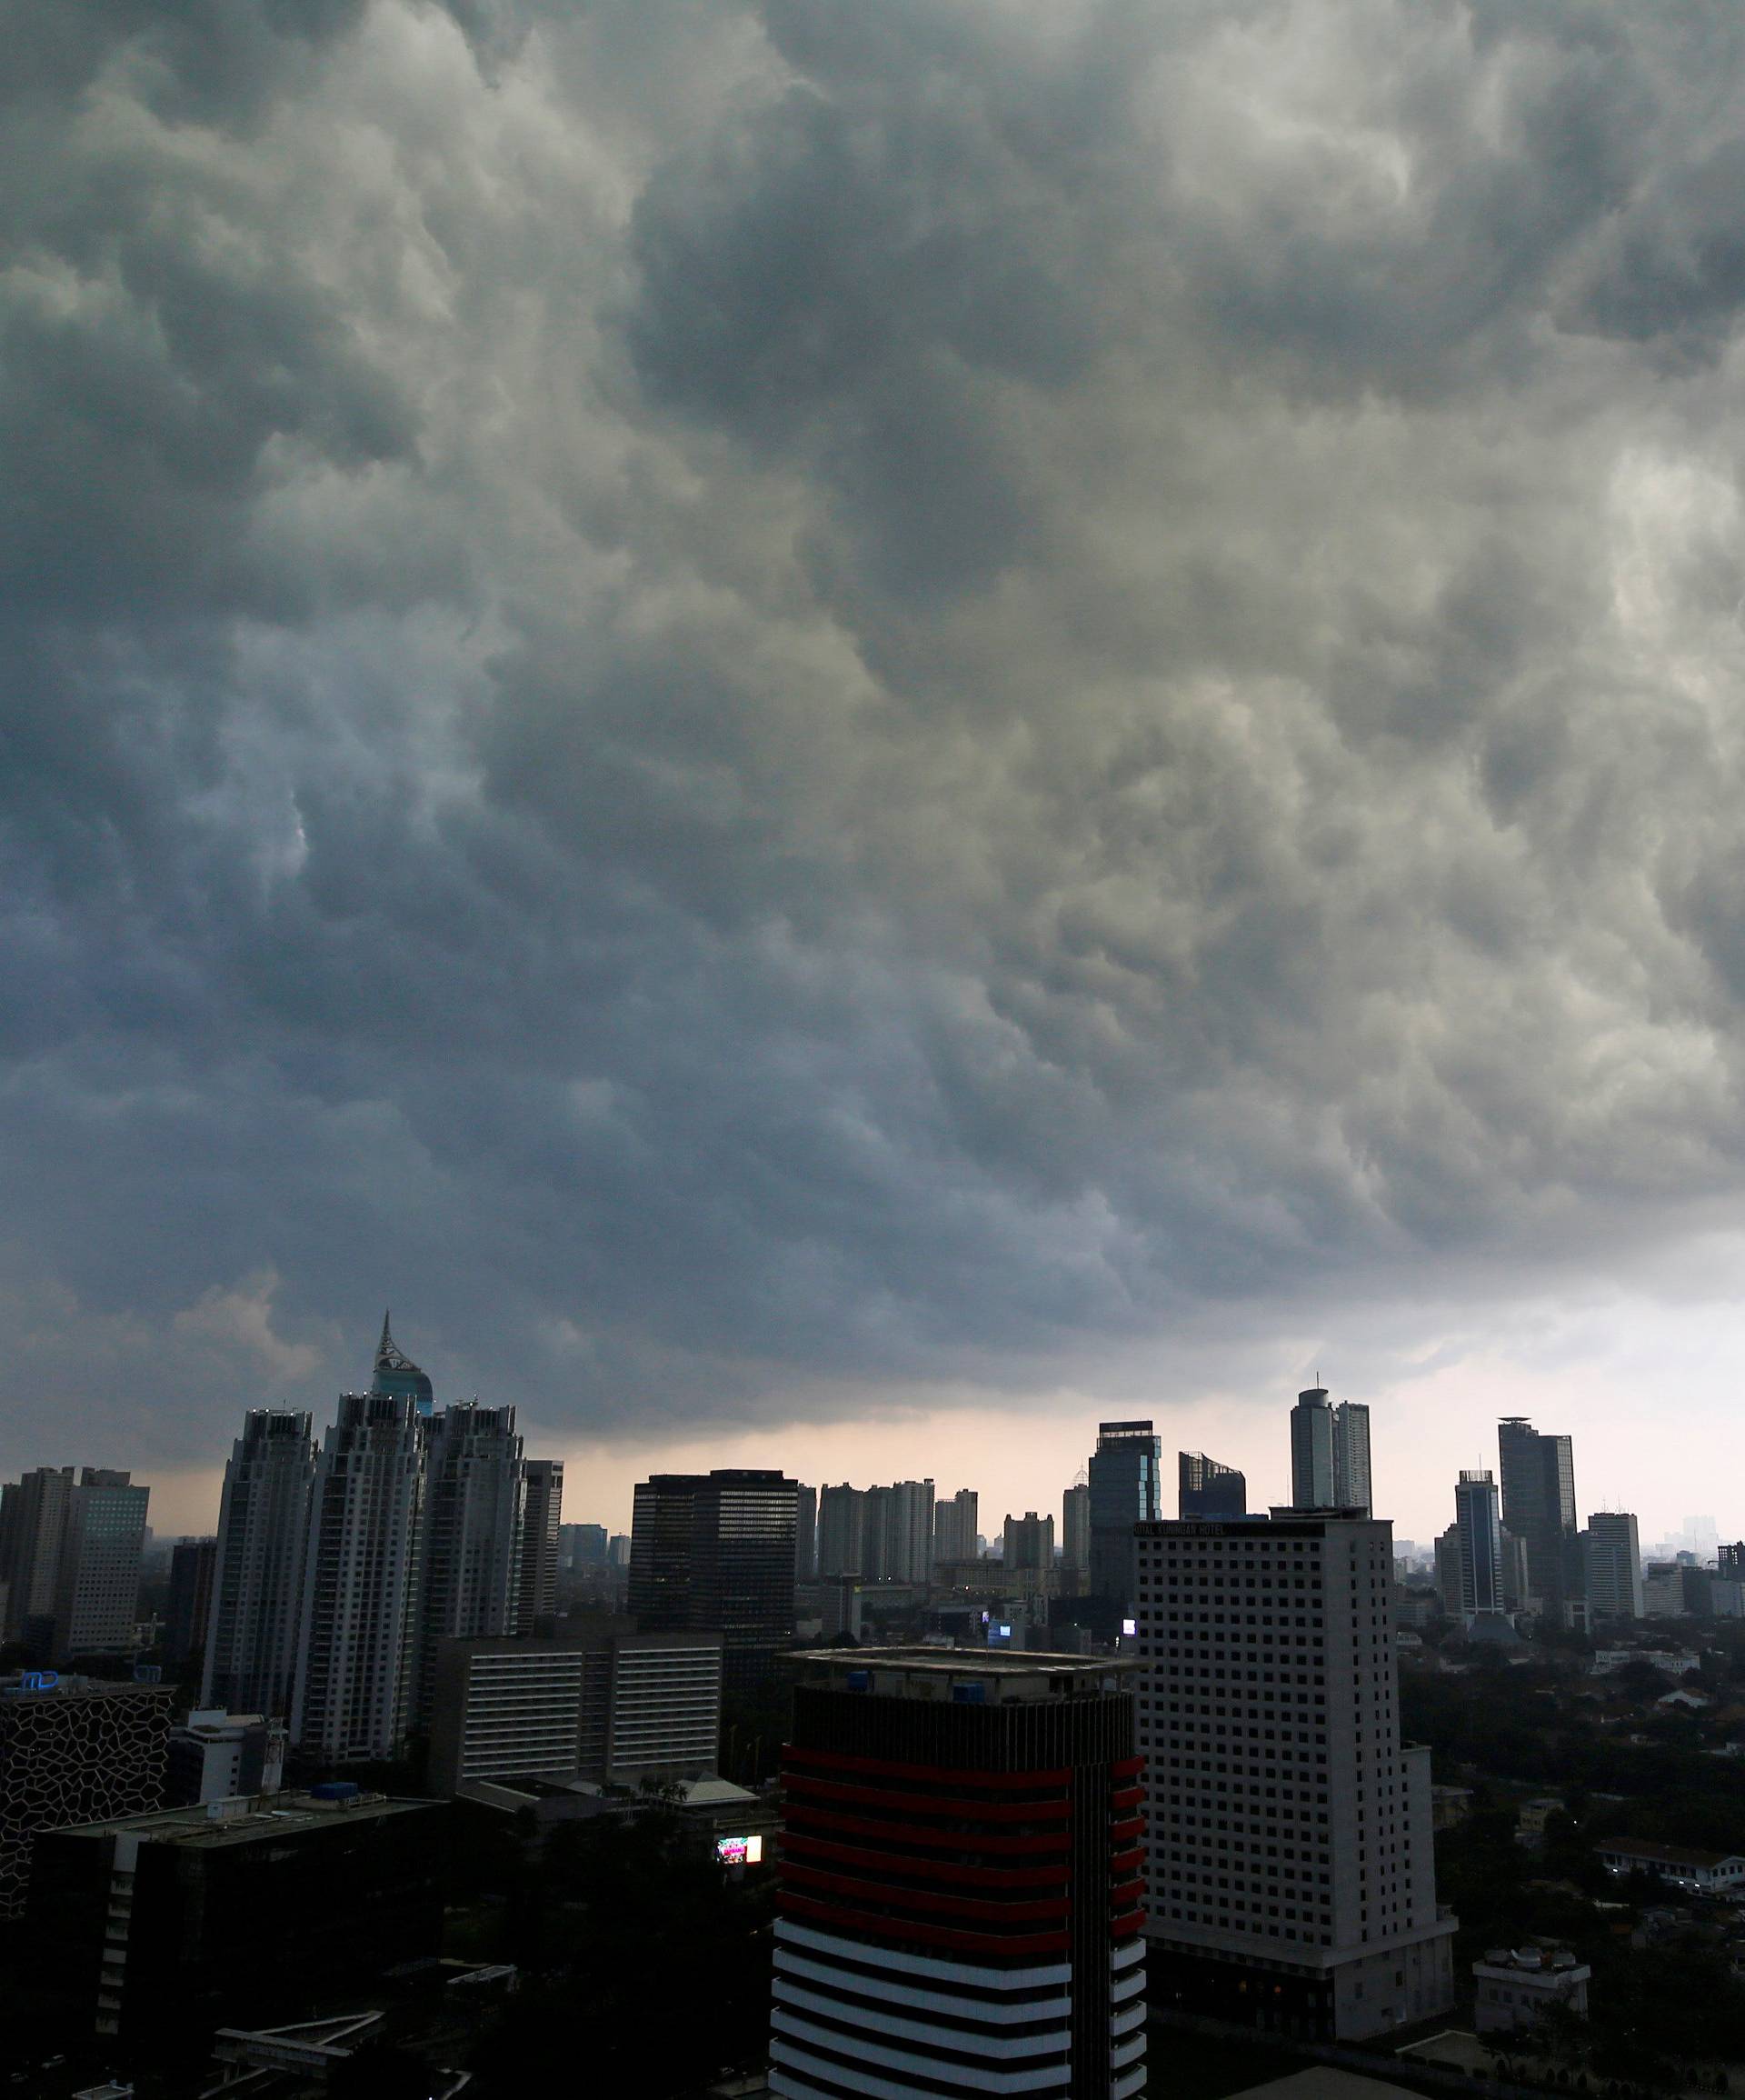 Storm clouds gather over Central Jakarta, Indonesia